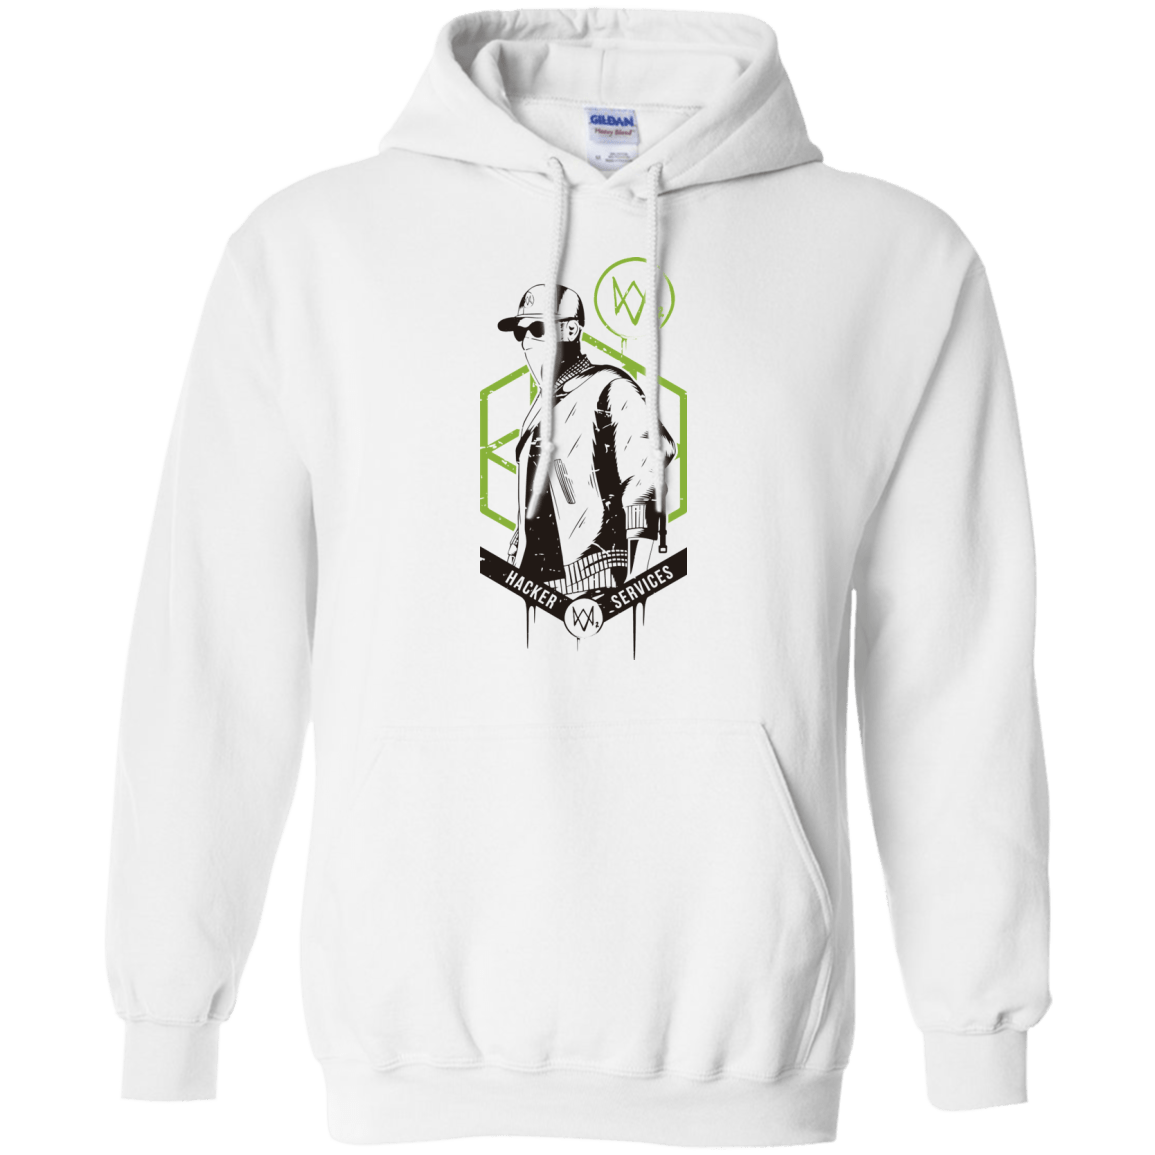 Sweatshirts White / Small Watch Dogs 2 Hacker Services Pullover Hoodie